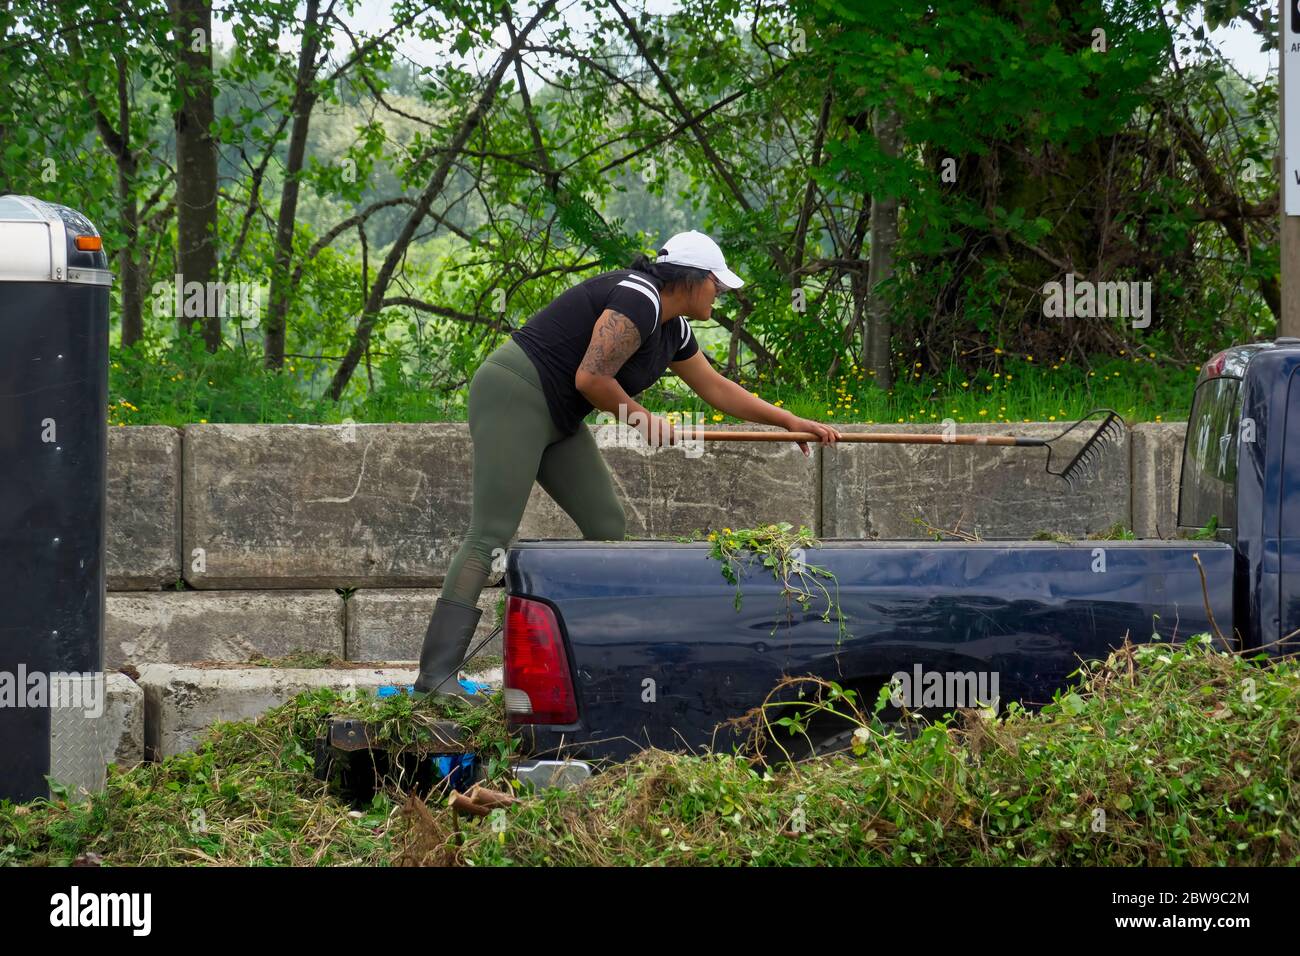 Woman with tattoos on her arm in white cap and rubber boots raking green waste out of the back of a pickup truck.  B. C., Canada.  Stock photo. Stock Photo